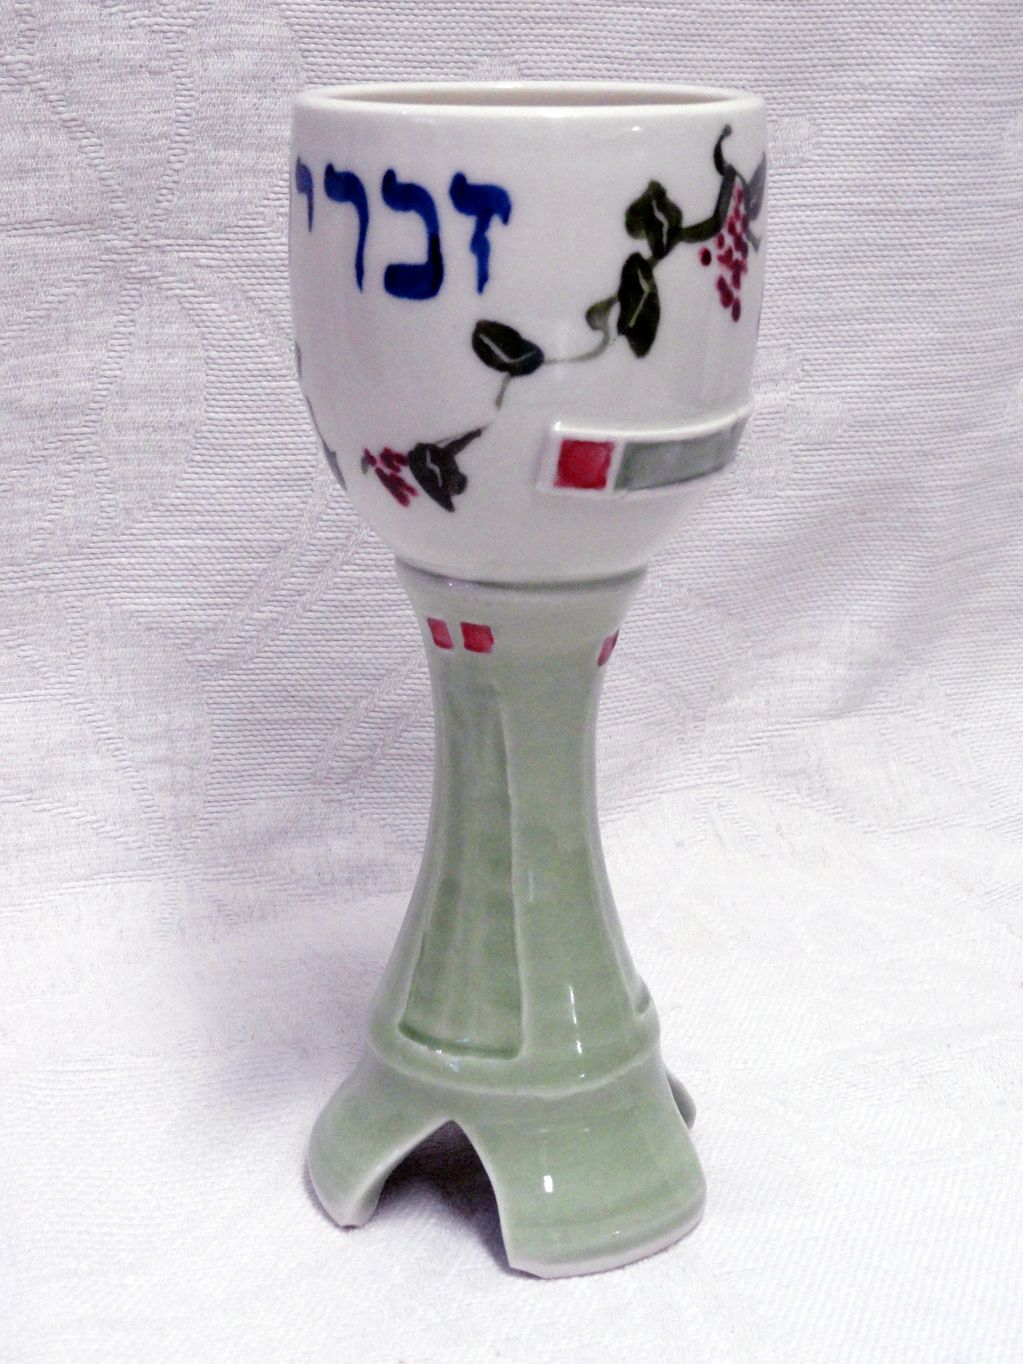 Custom kidduh cup. Names, dates or places is your choice. White, blue red, grape vine